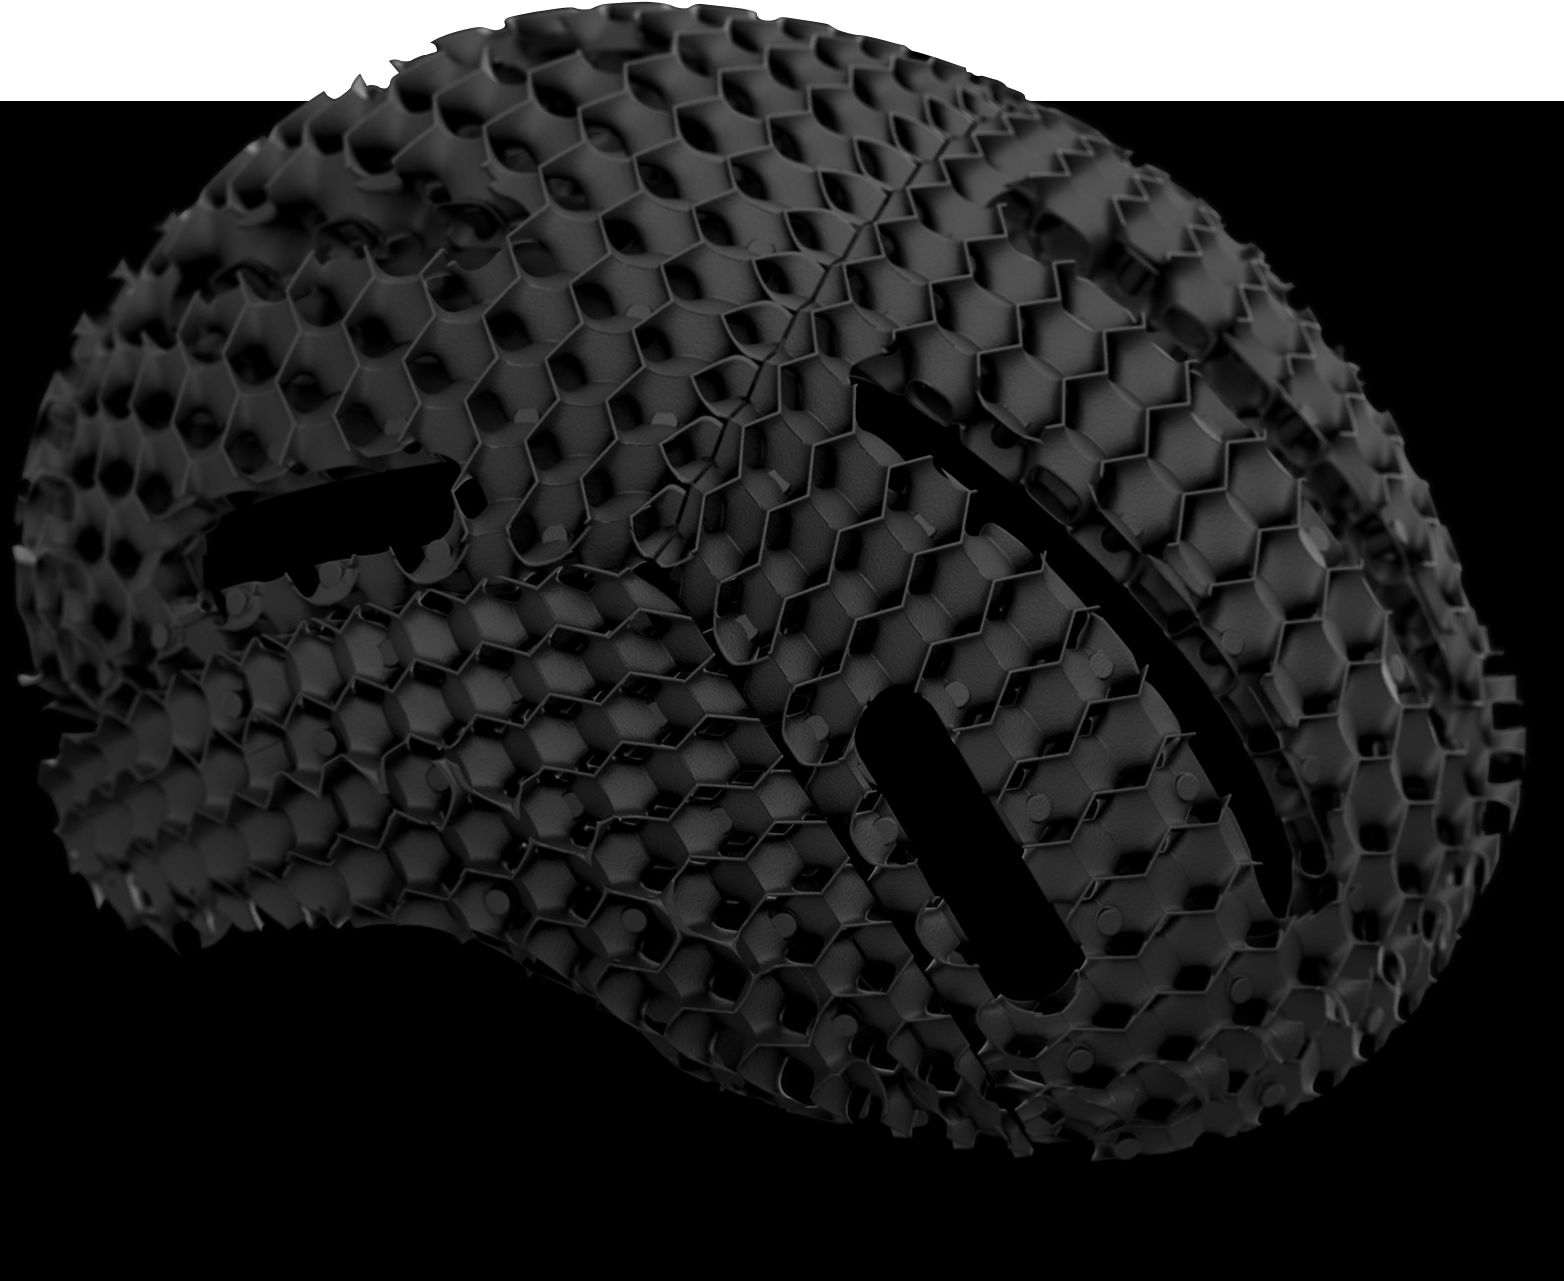 The first 3D printed helmet from Kupol puts a new spin on comfort & safety